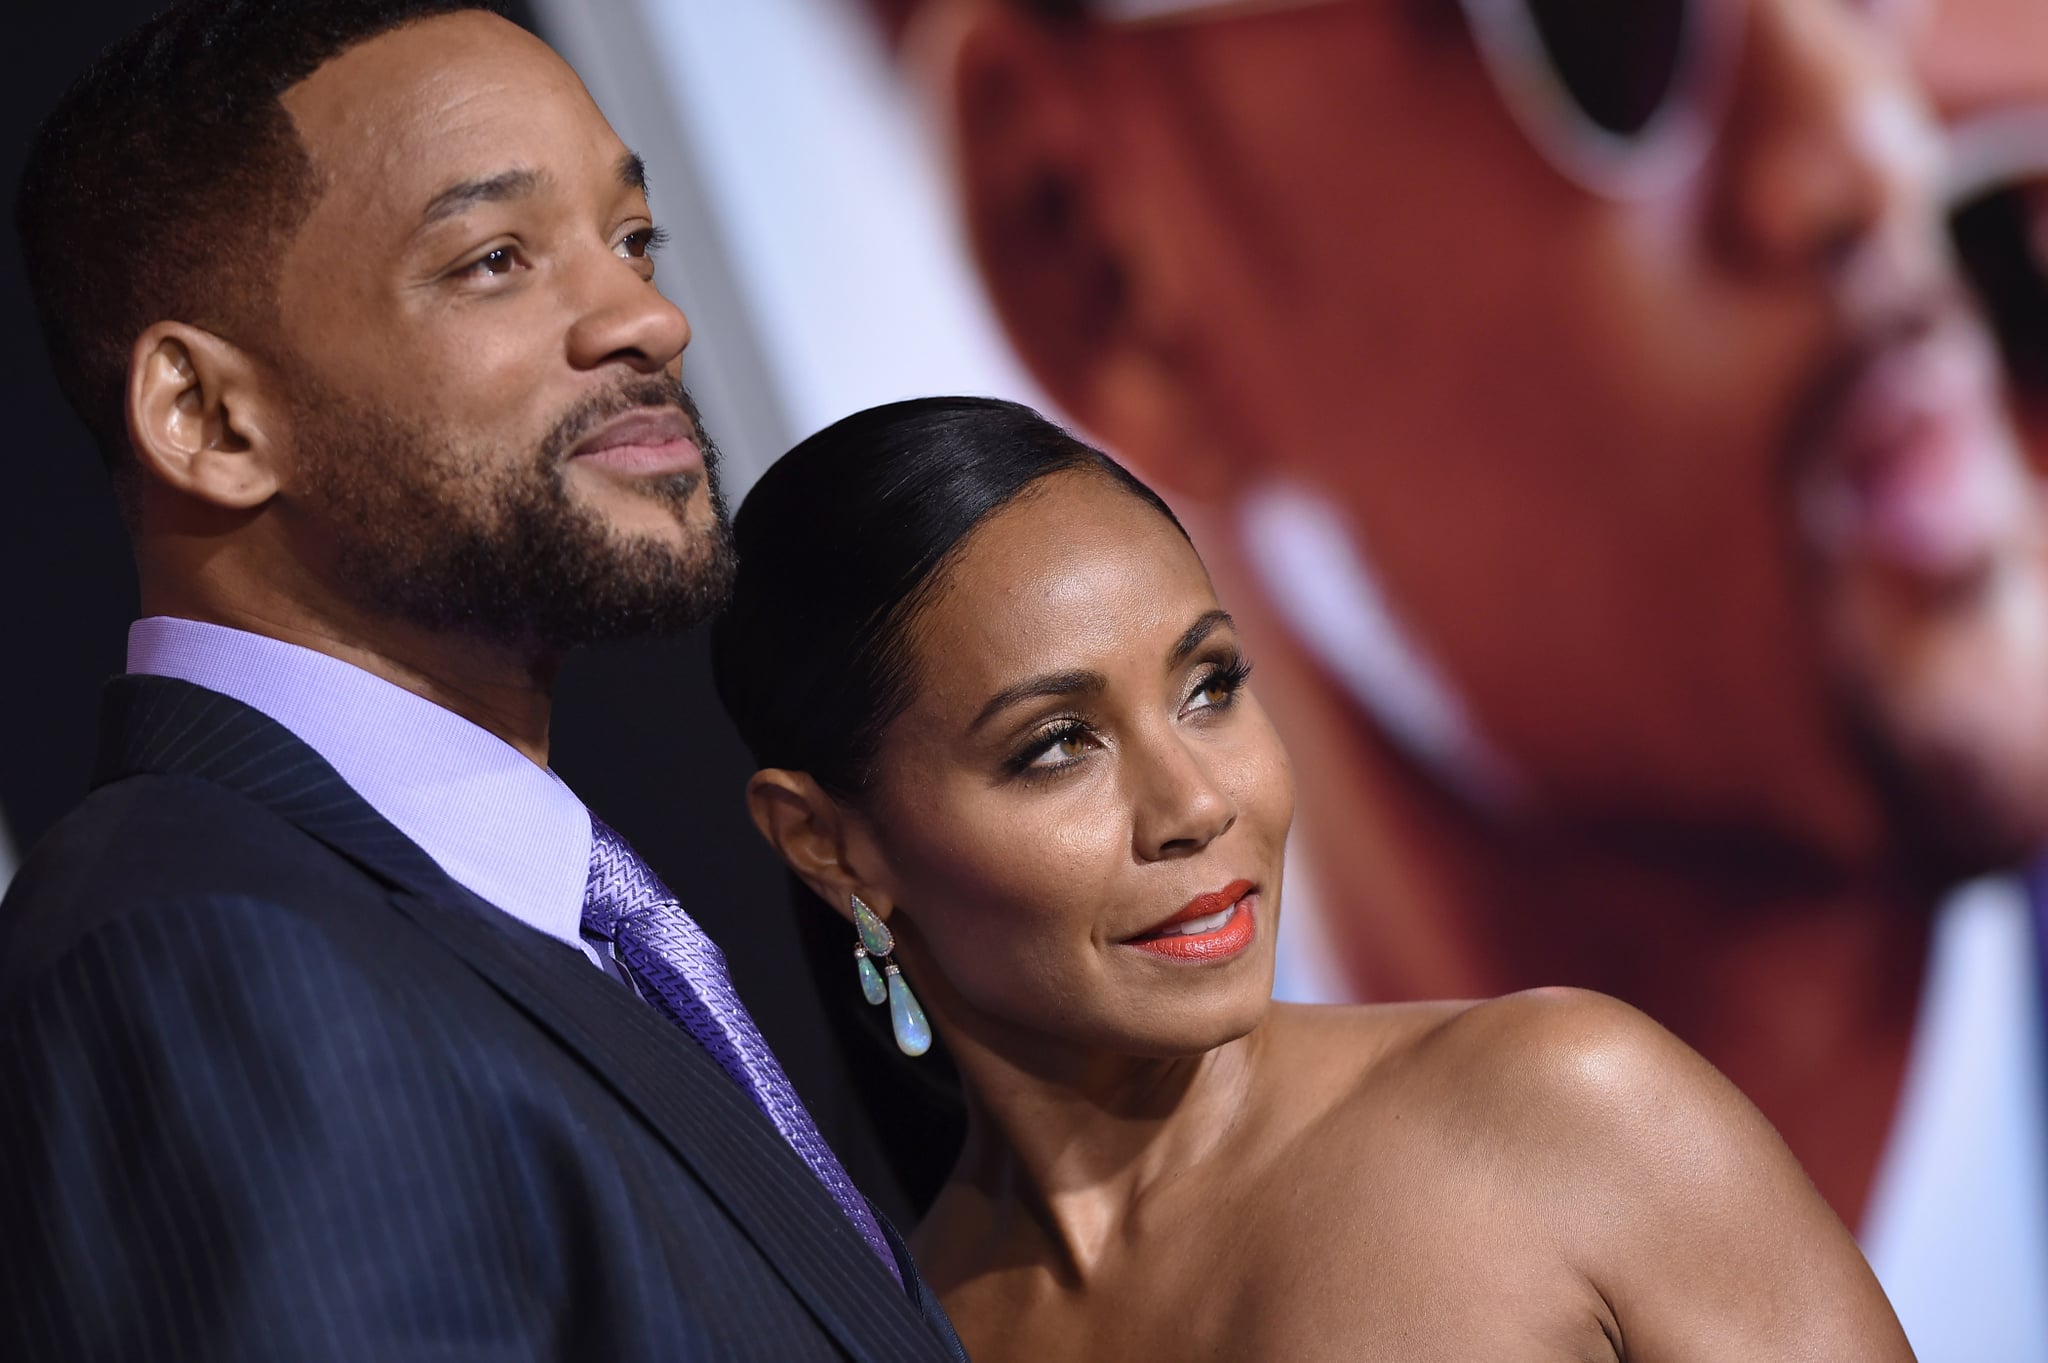 HOLLYWOOD, CA - FEBRUARY 24:  Actors Will Smith and Jada Pinkett Smith arrive at the Los Angeles World Premiere of Warner Bros. Pictures 'Focus' at TCL Chinese Theatre on February 24, 2015 in Hollywood, California.  (Photo by Axelle/Bauer-Griffin/FilmMagic)